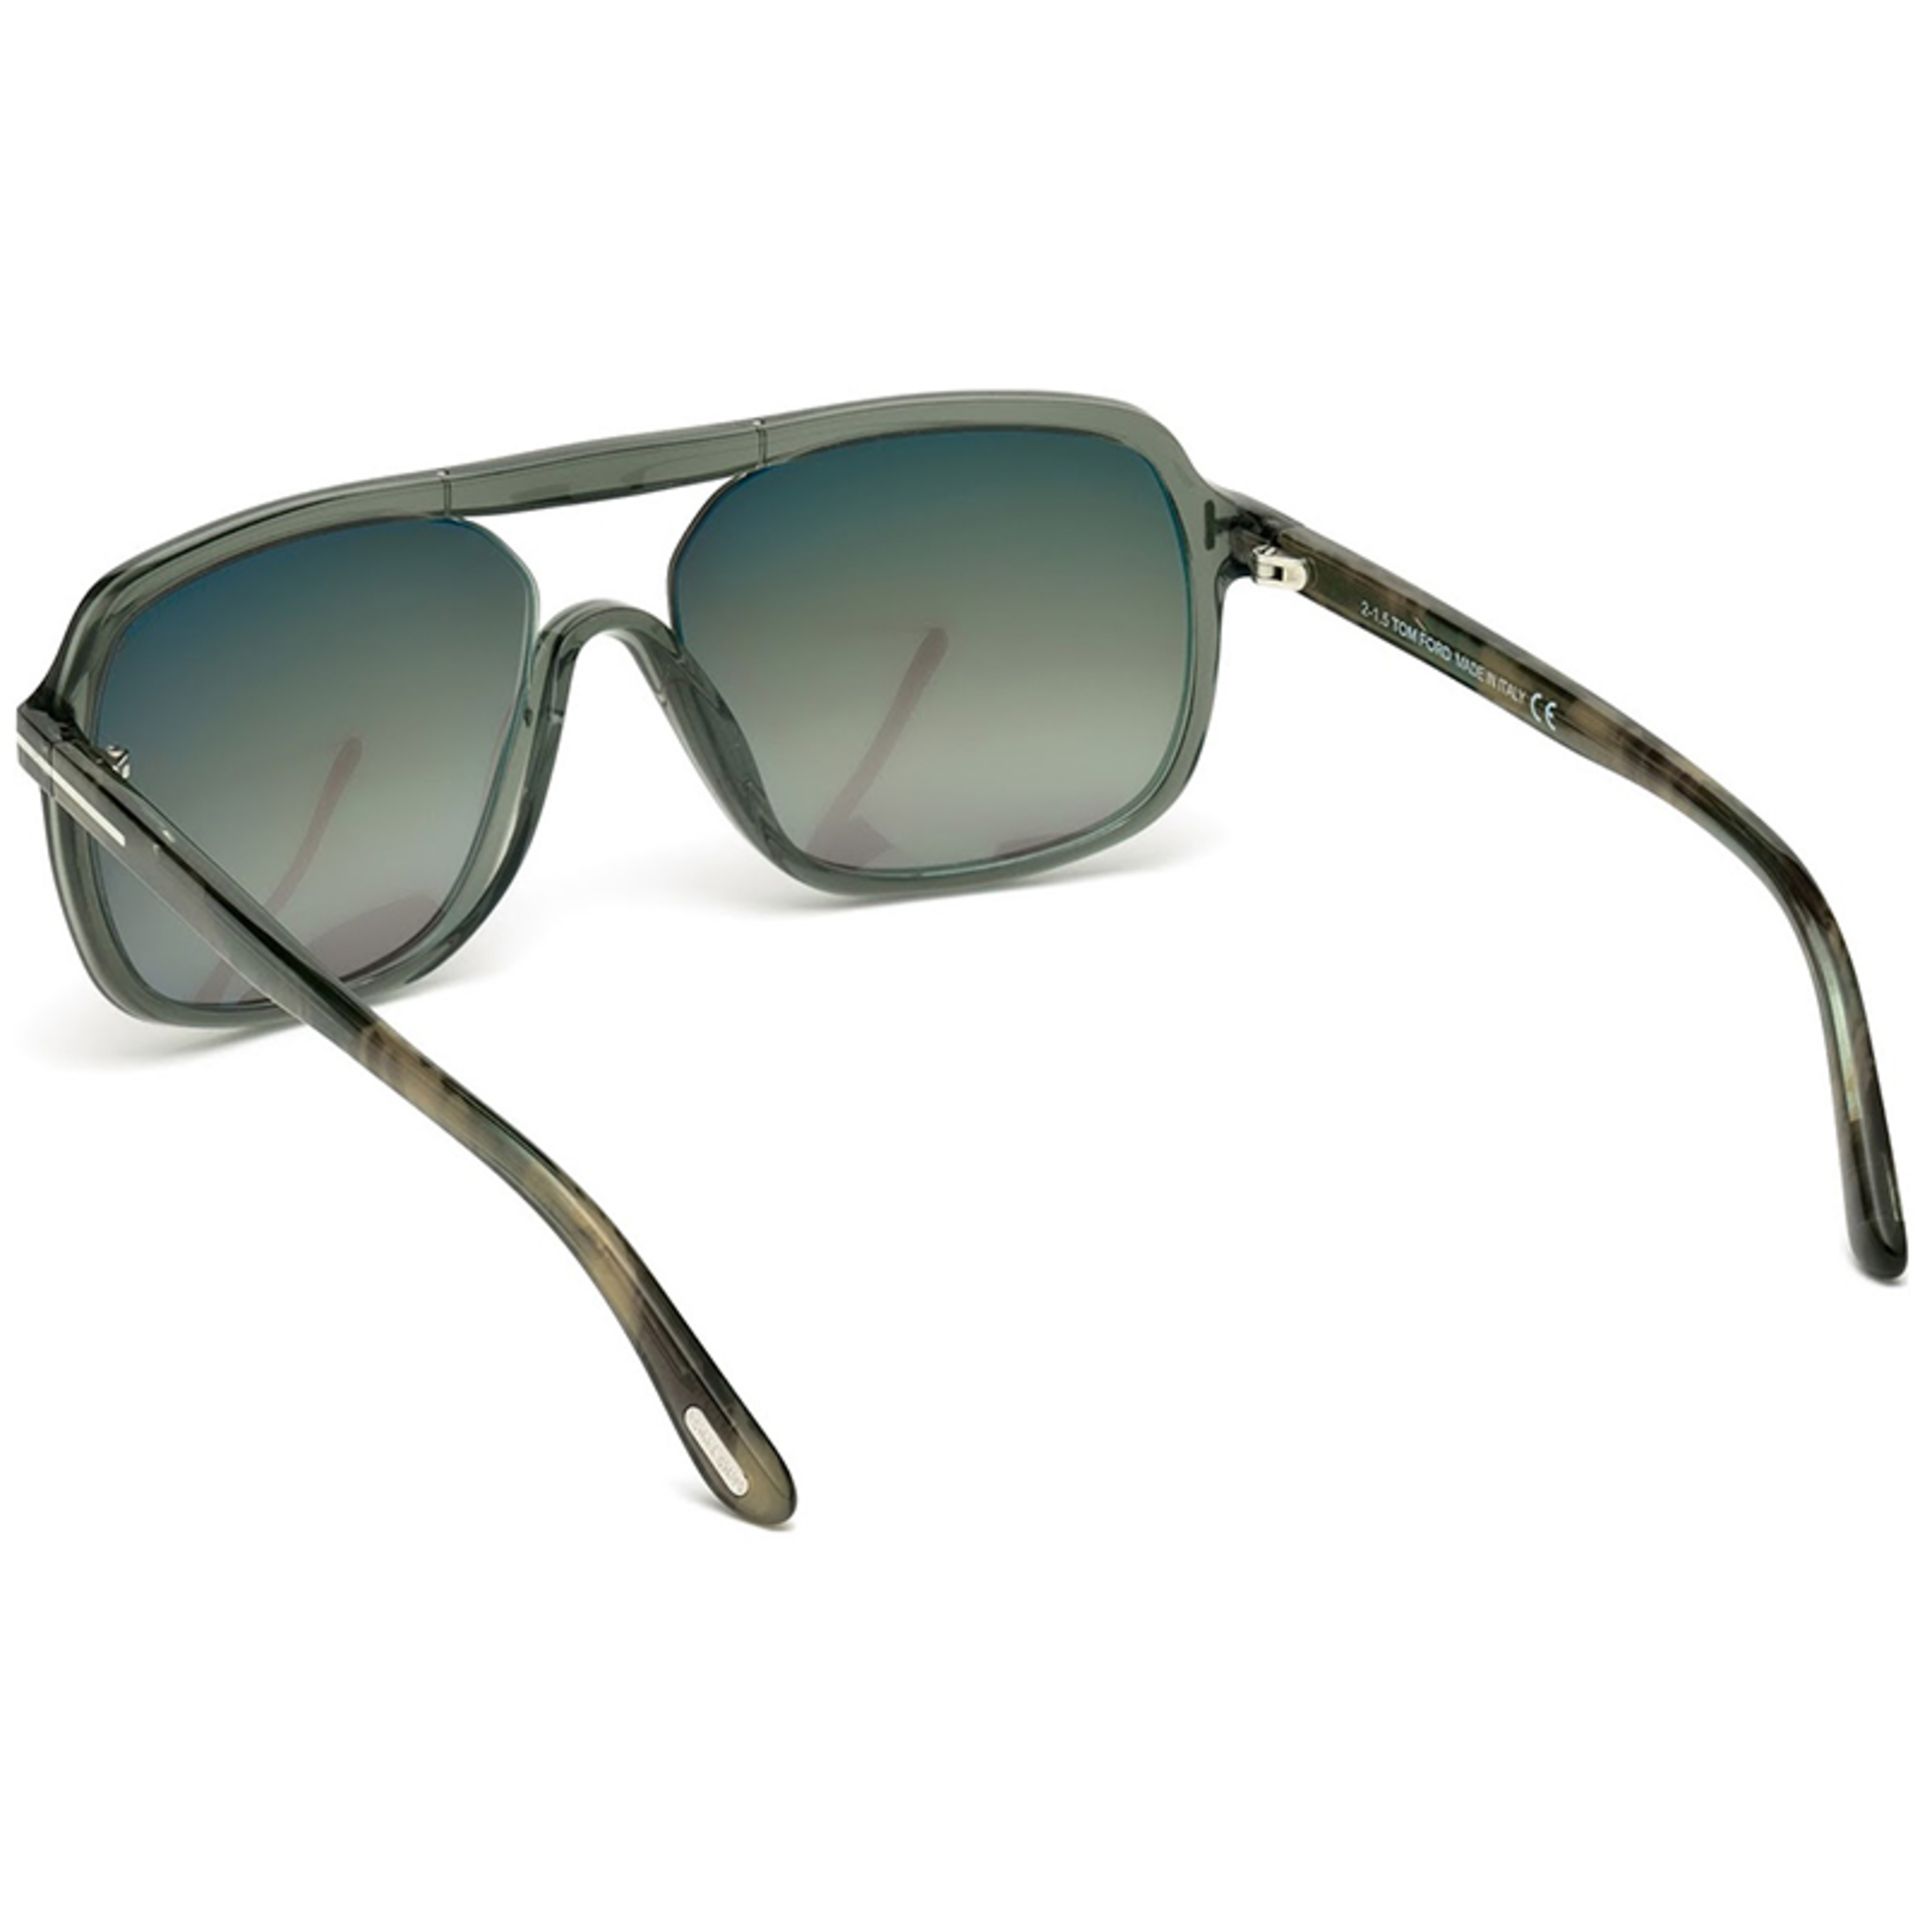 Tom Ford Sunglass ,Male,Model:FT0442 59 96B - Image 3 of 4